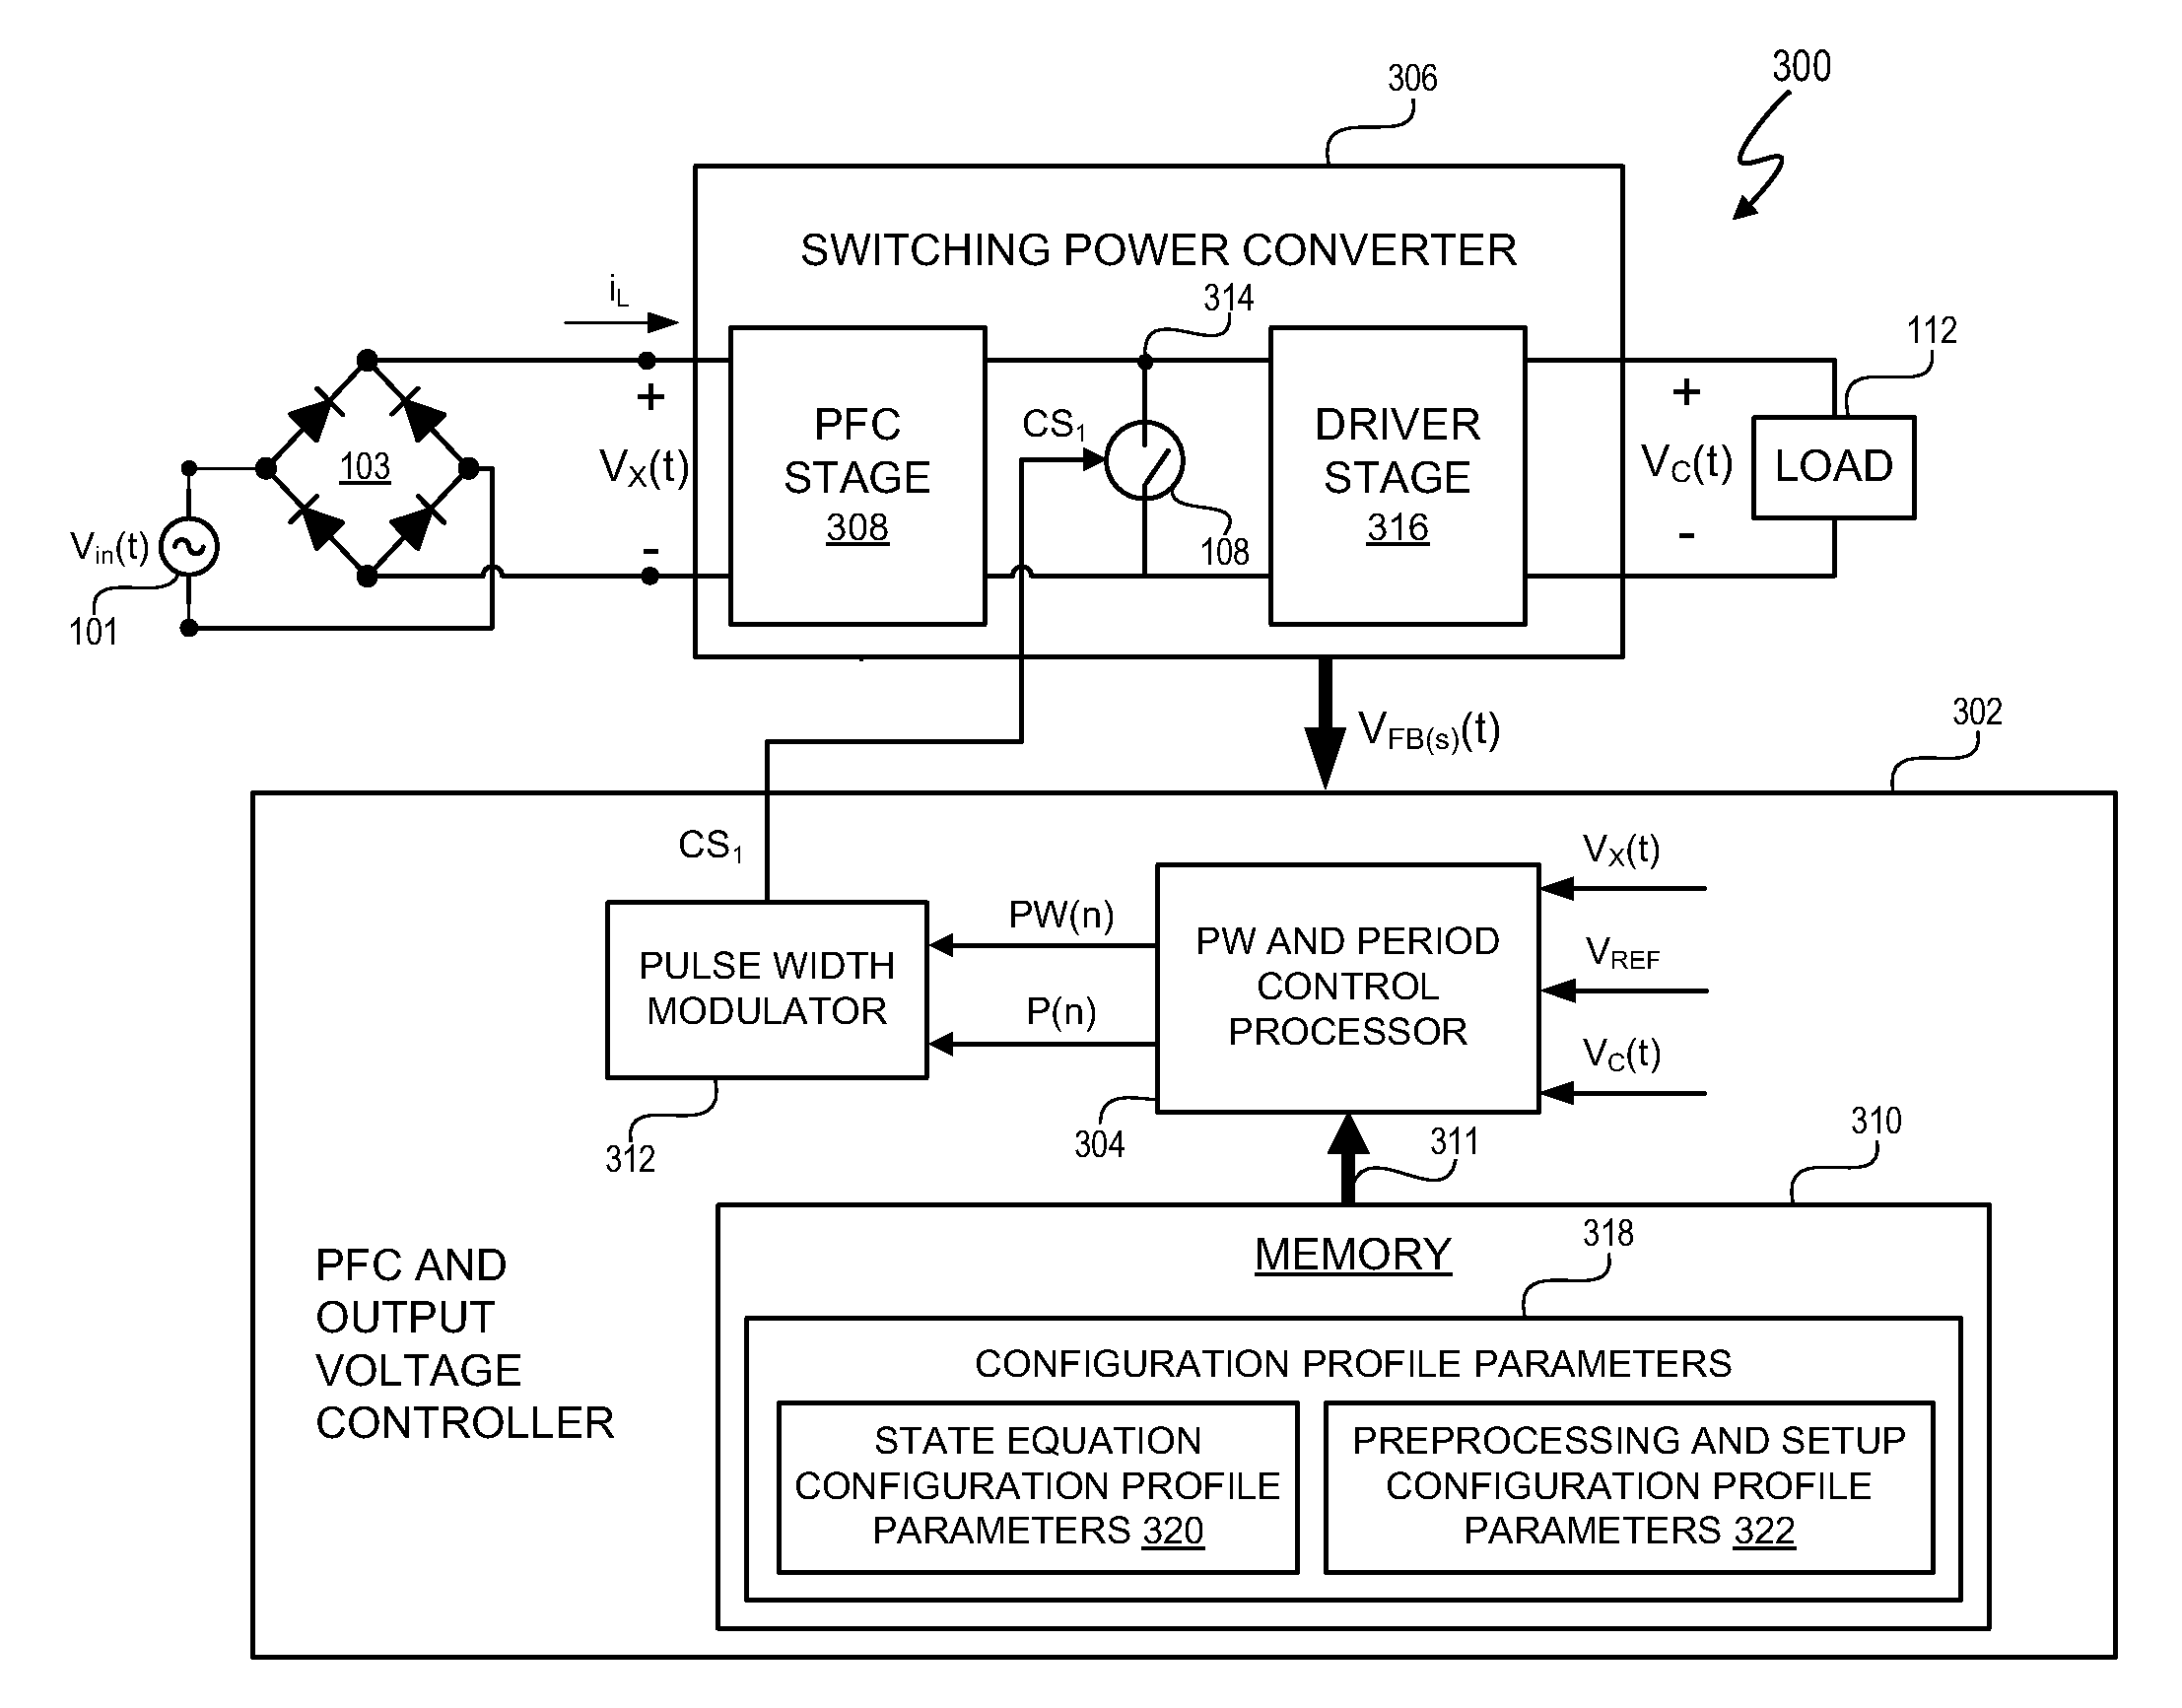 Programmable power control system